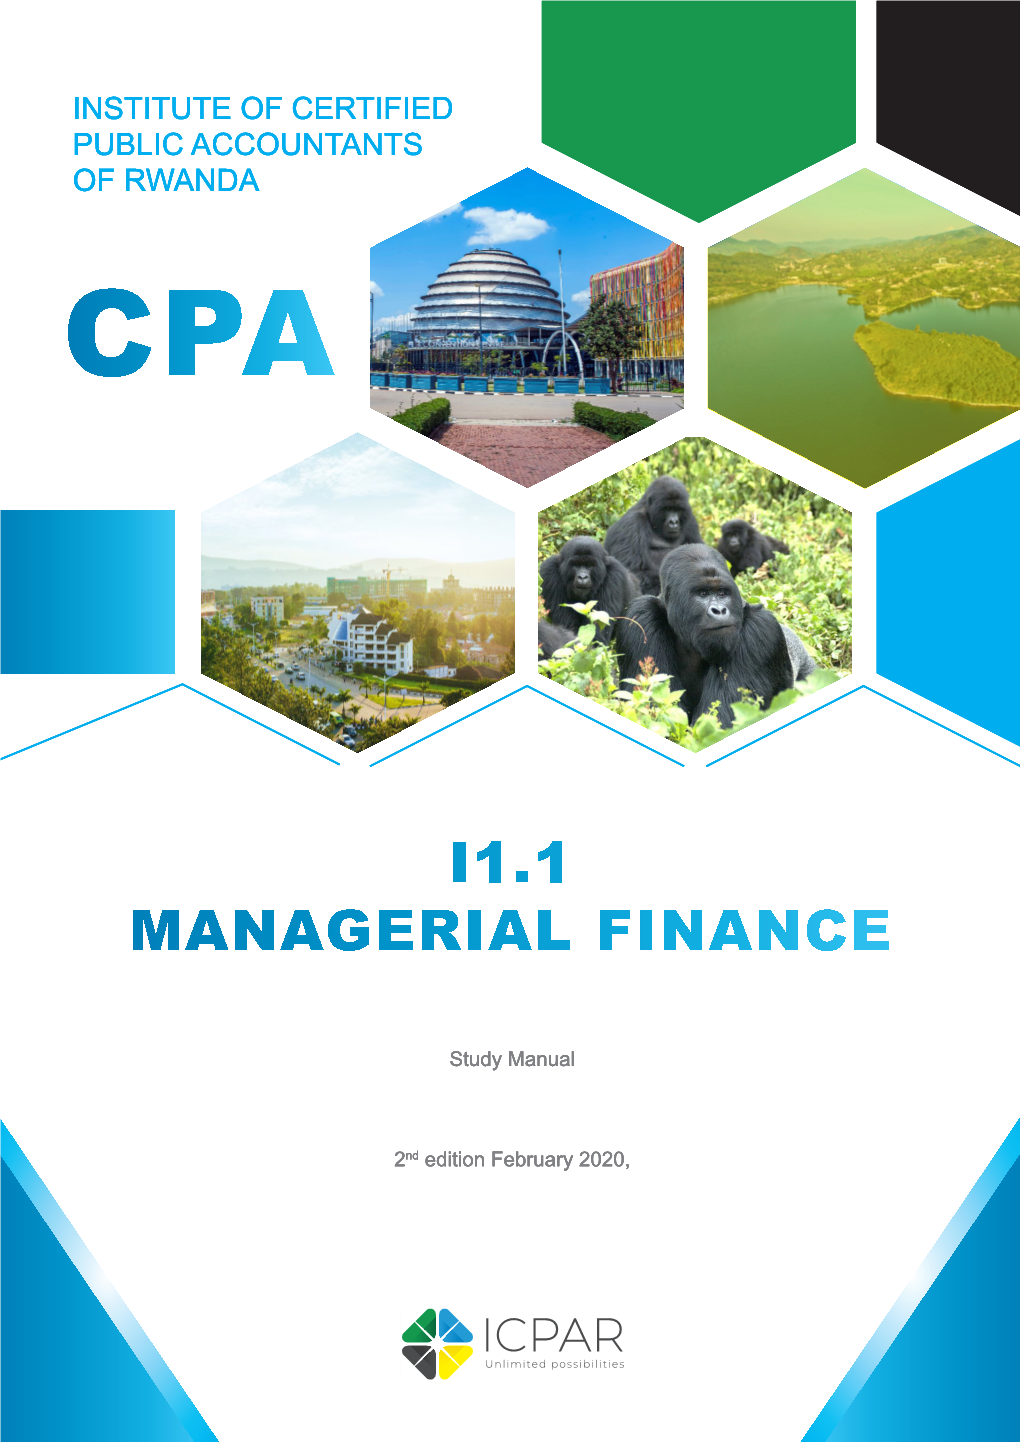 I1.1 Managerial Finance